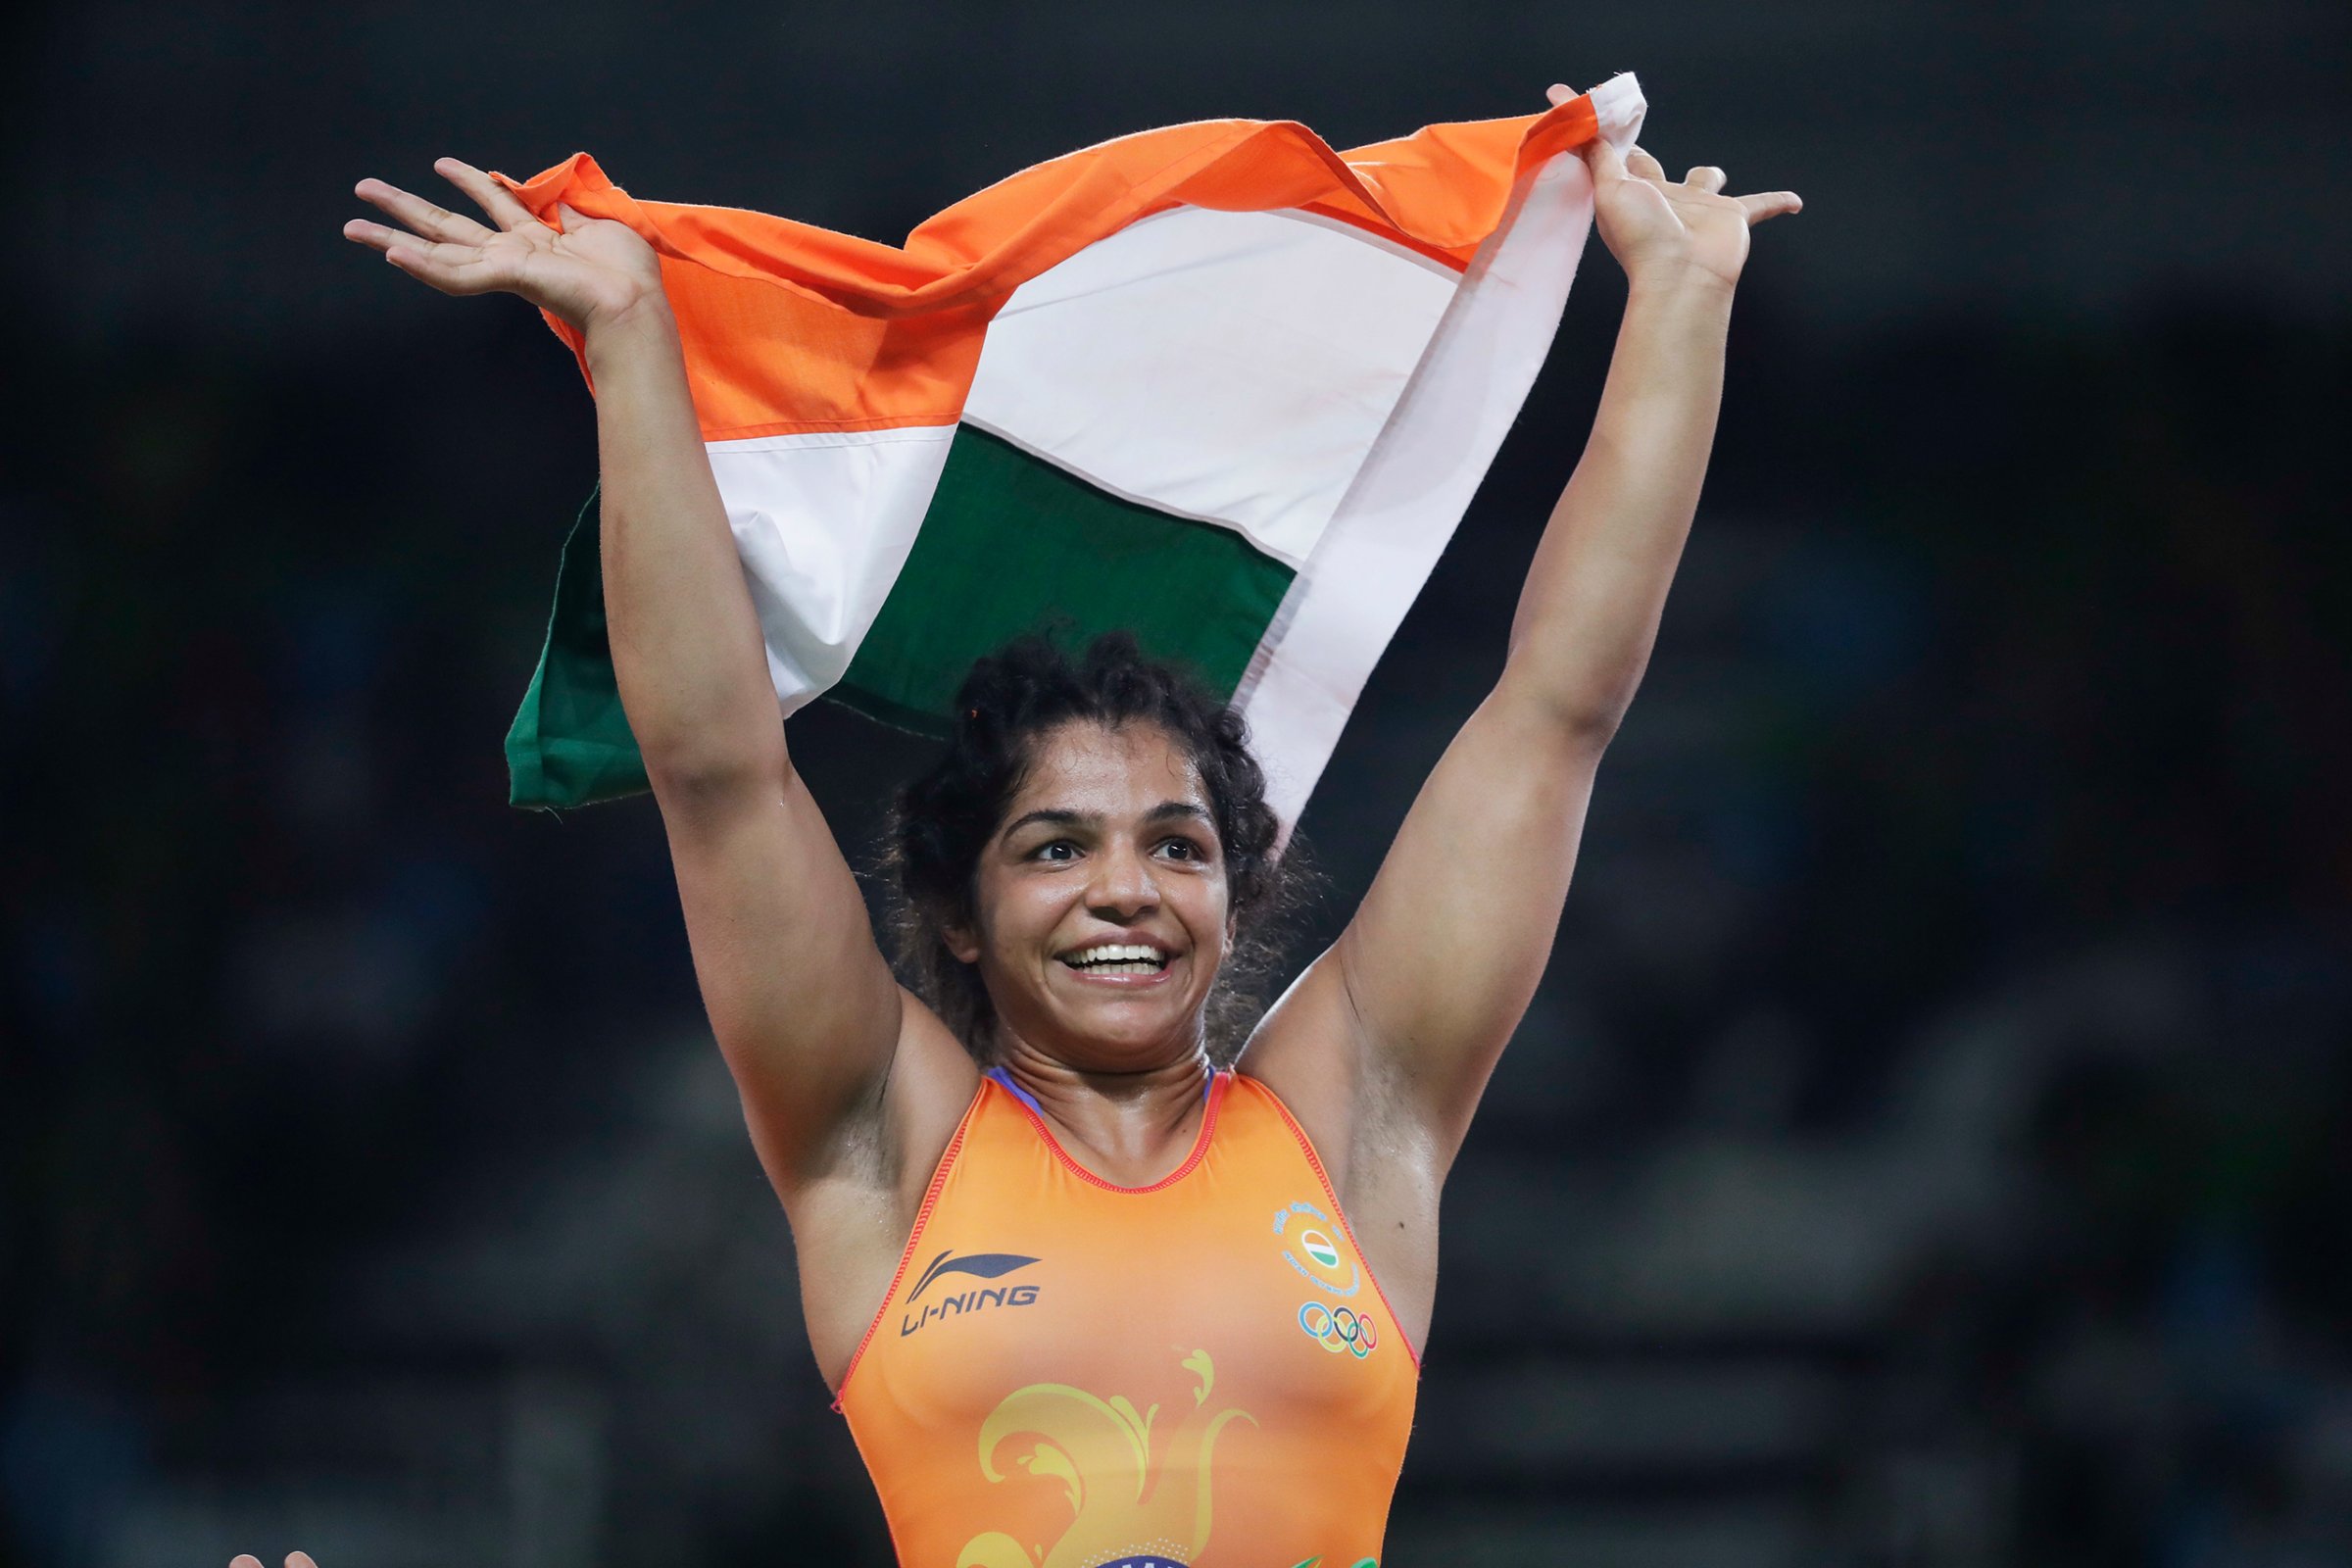 India's Sakshi Malik reacts after winning bronze against Kyrgyzstan's Aisuluu Tynybekova in the women's wrestling freestyle 58-kg competition at the 2016 Summer Olympics in Rio de Janeiro on Aug. 17, 2016.